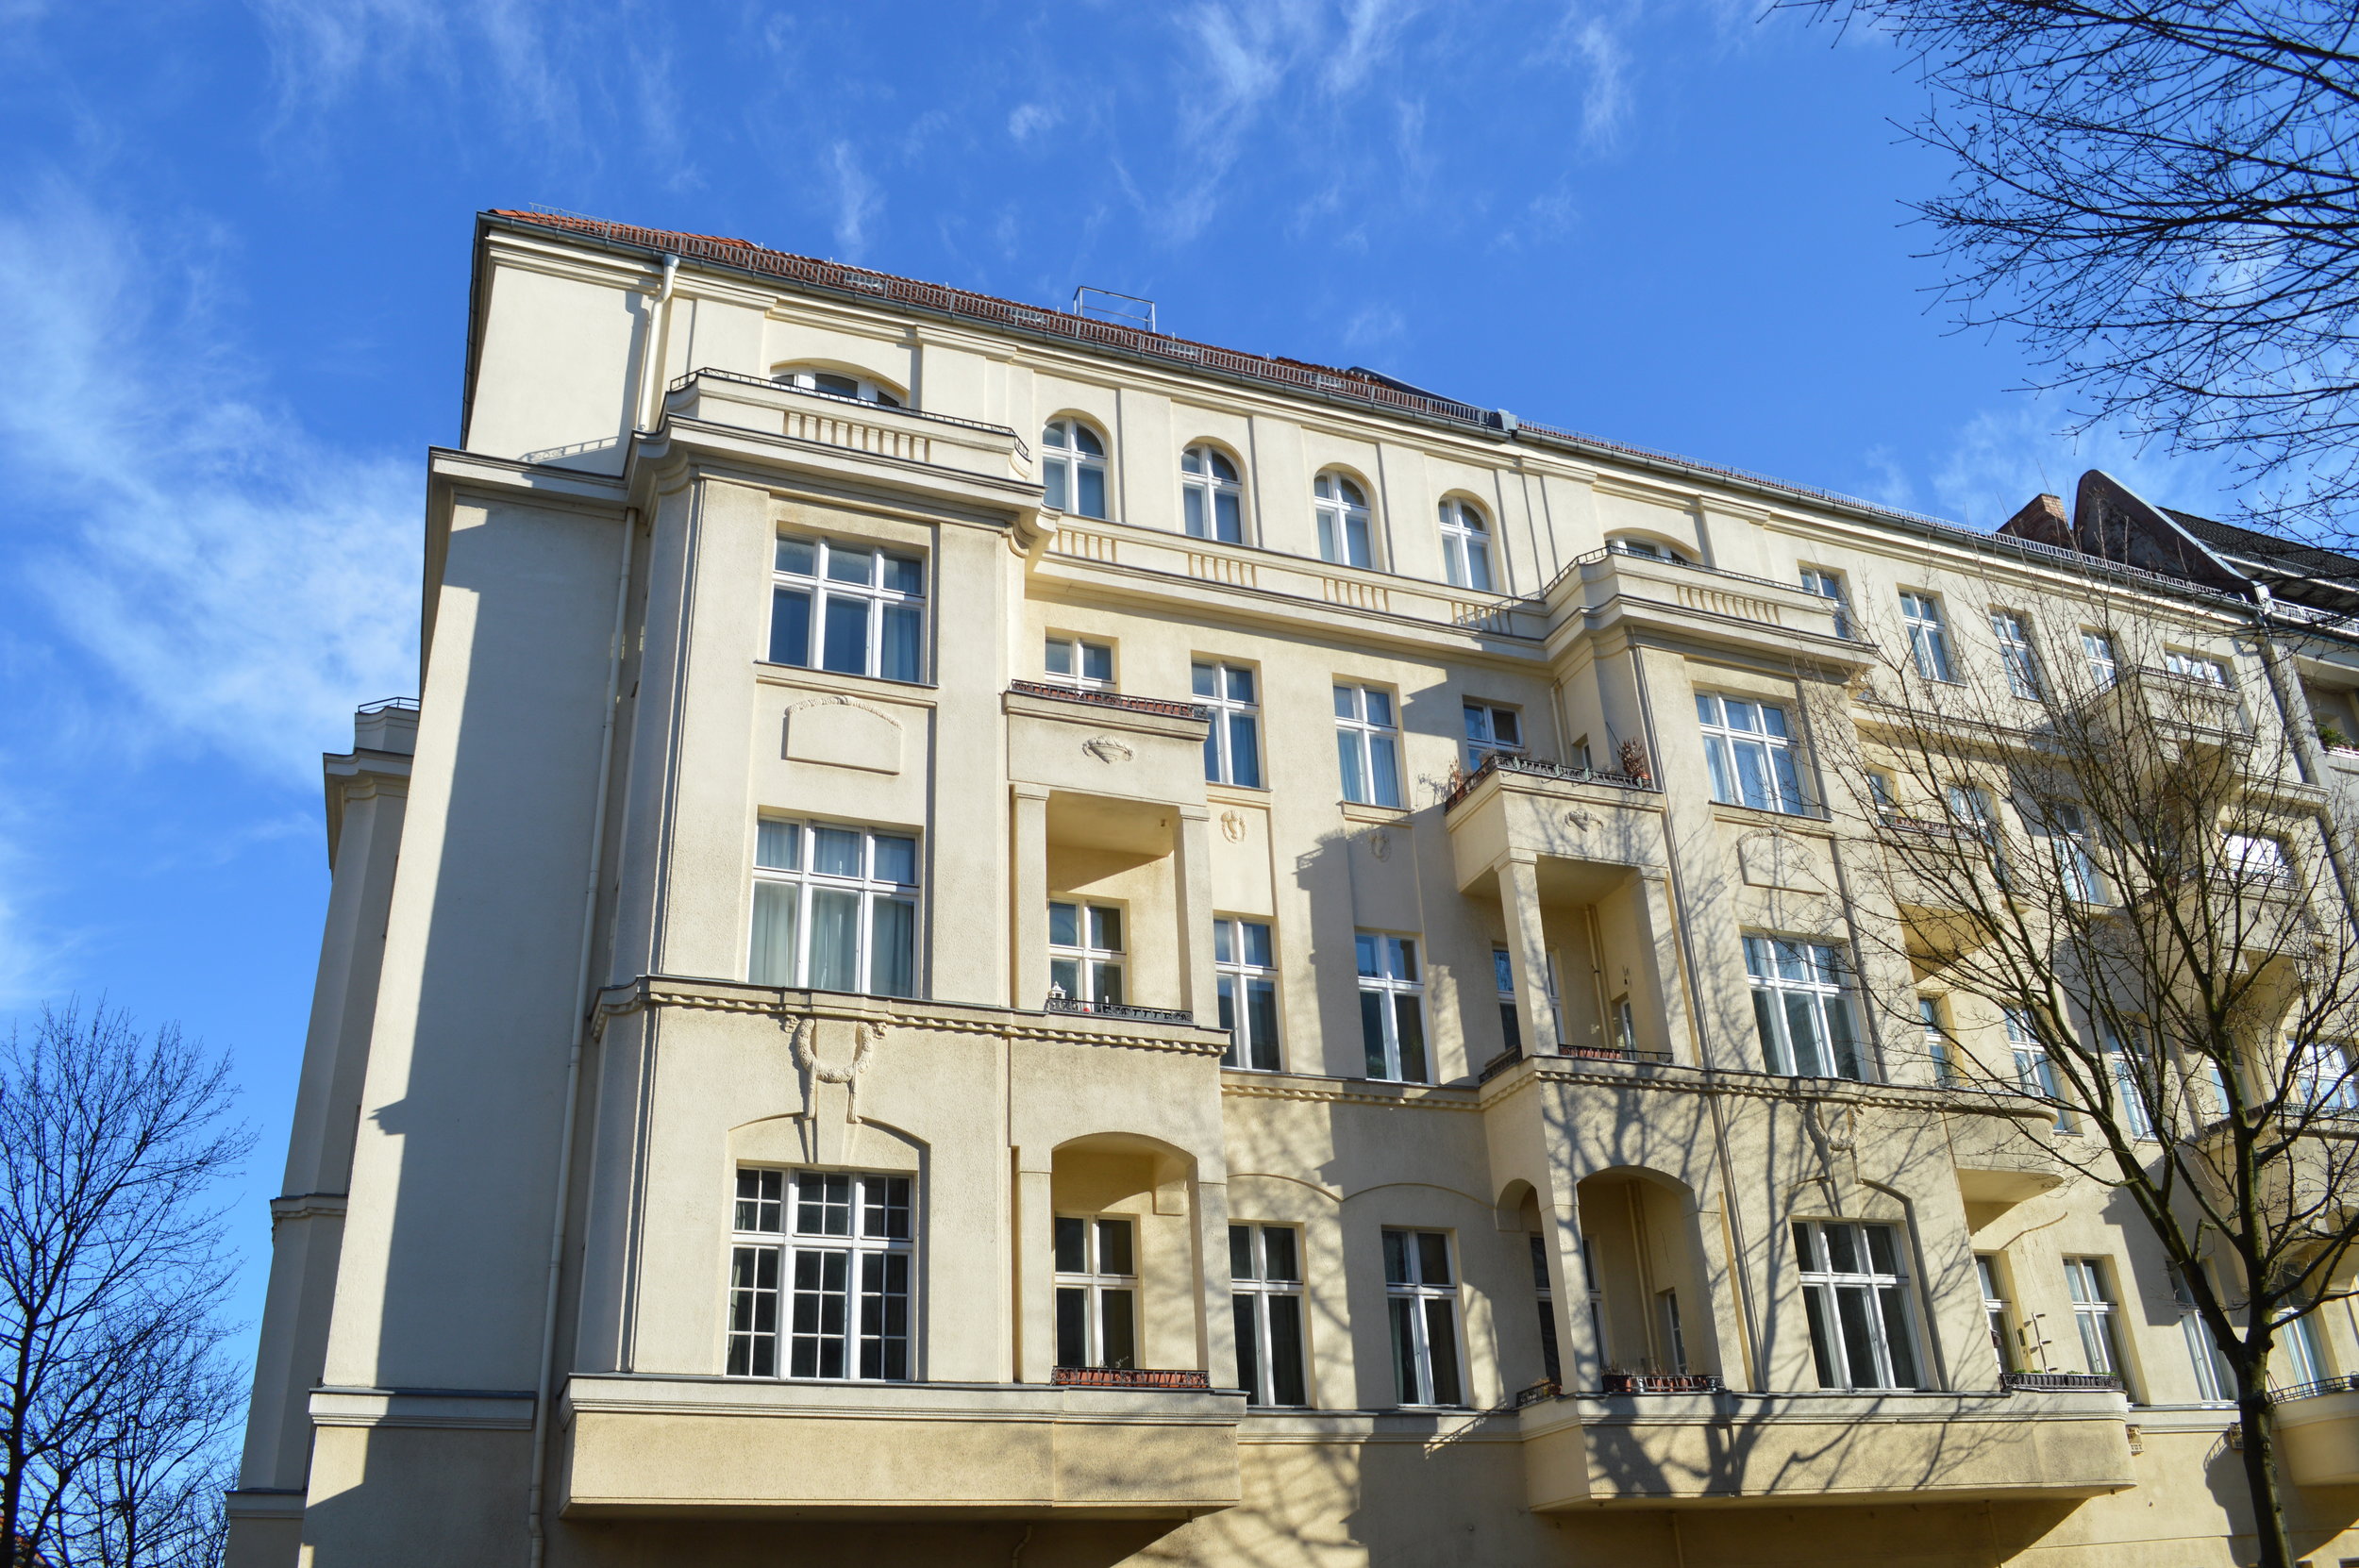 The coliving space is located in this beatiful old building in Berlin Prenzlauer Berg